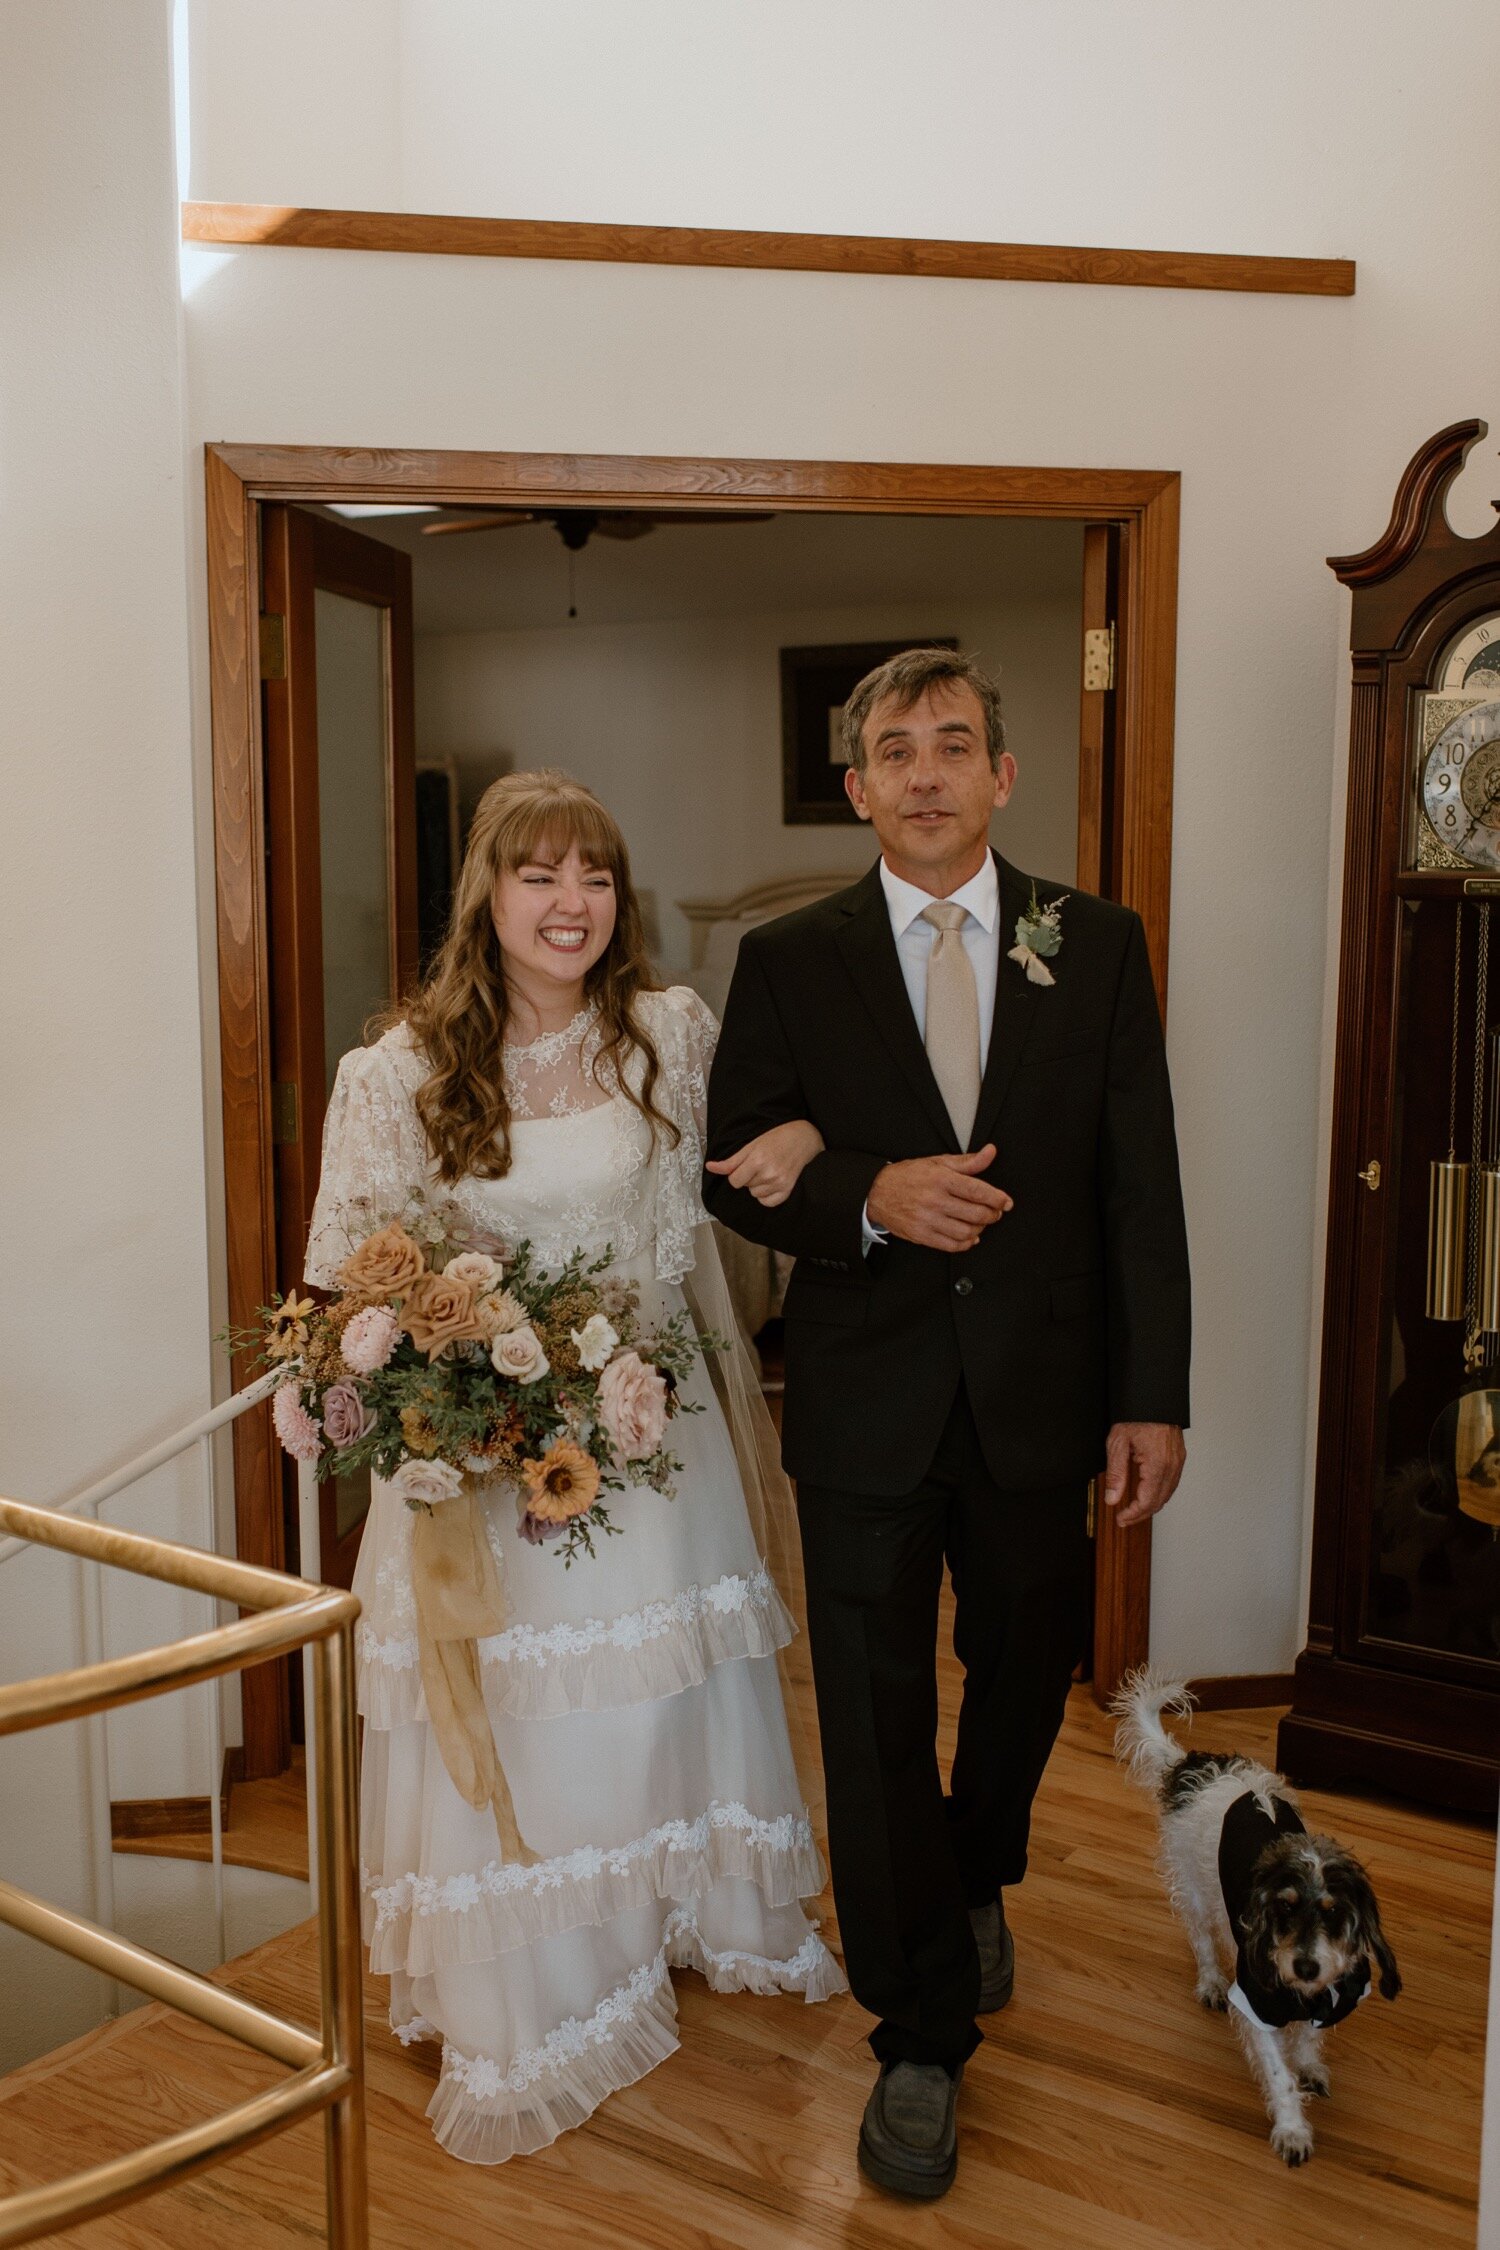 Corry and Michael's Golden Vintage Living Room Wedding  in a Portland Floating House | Oregon Wedding Photographer